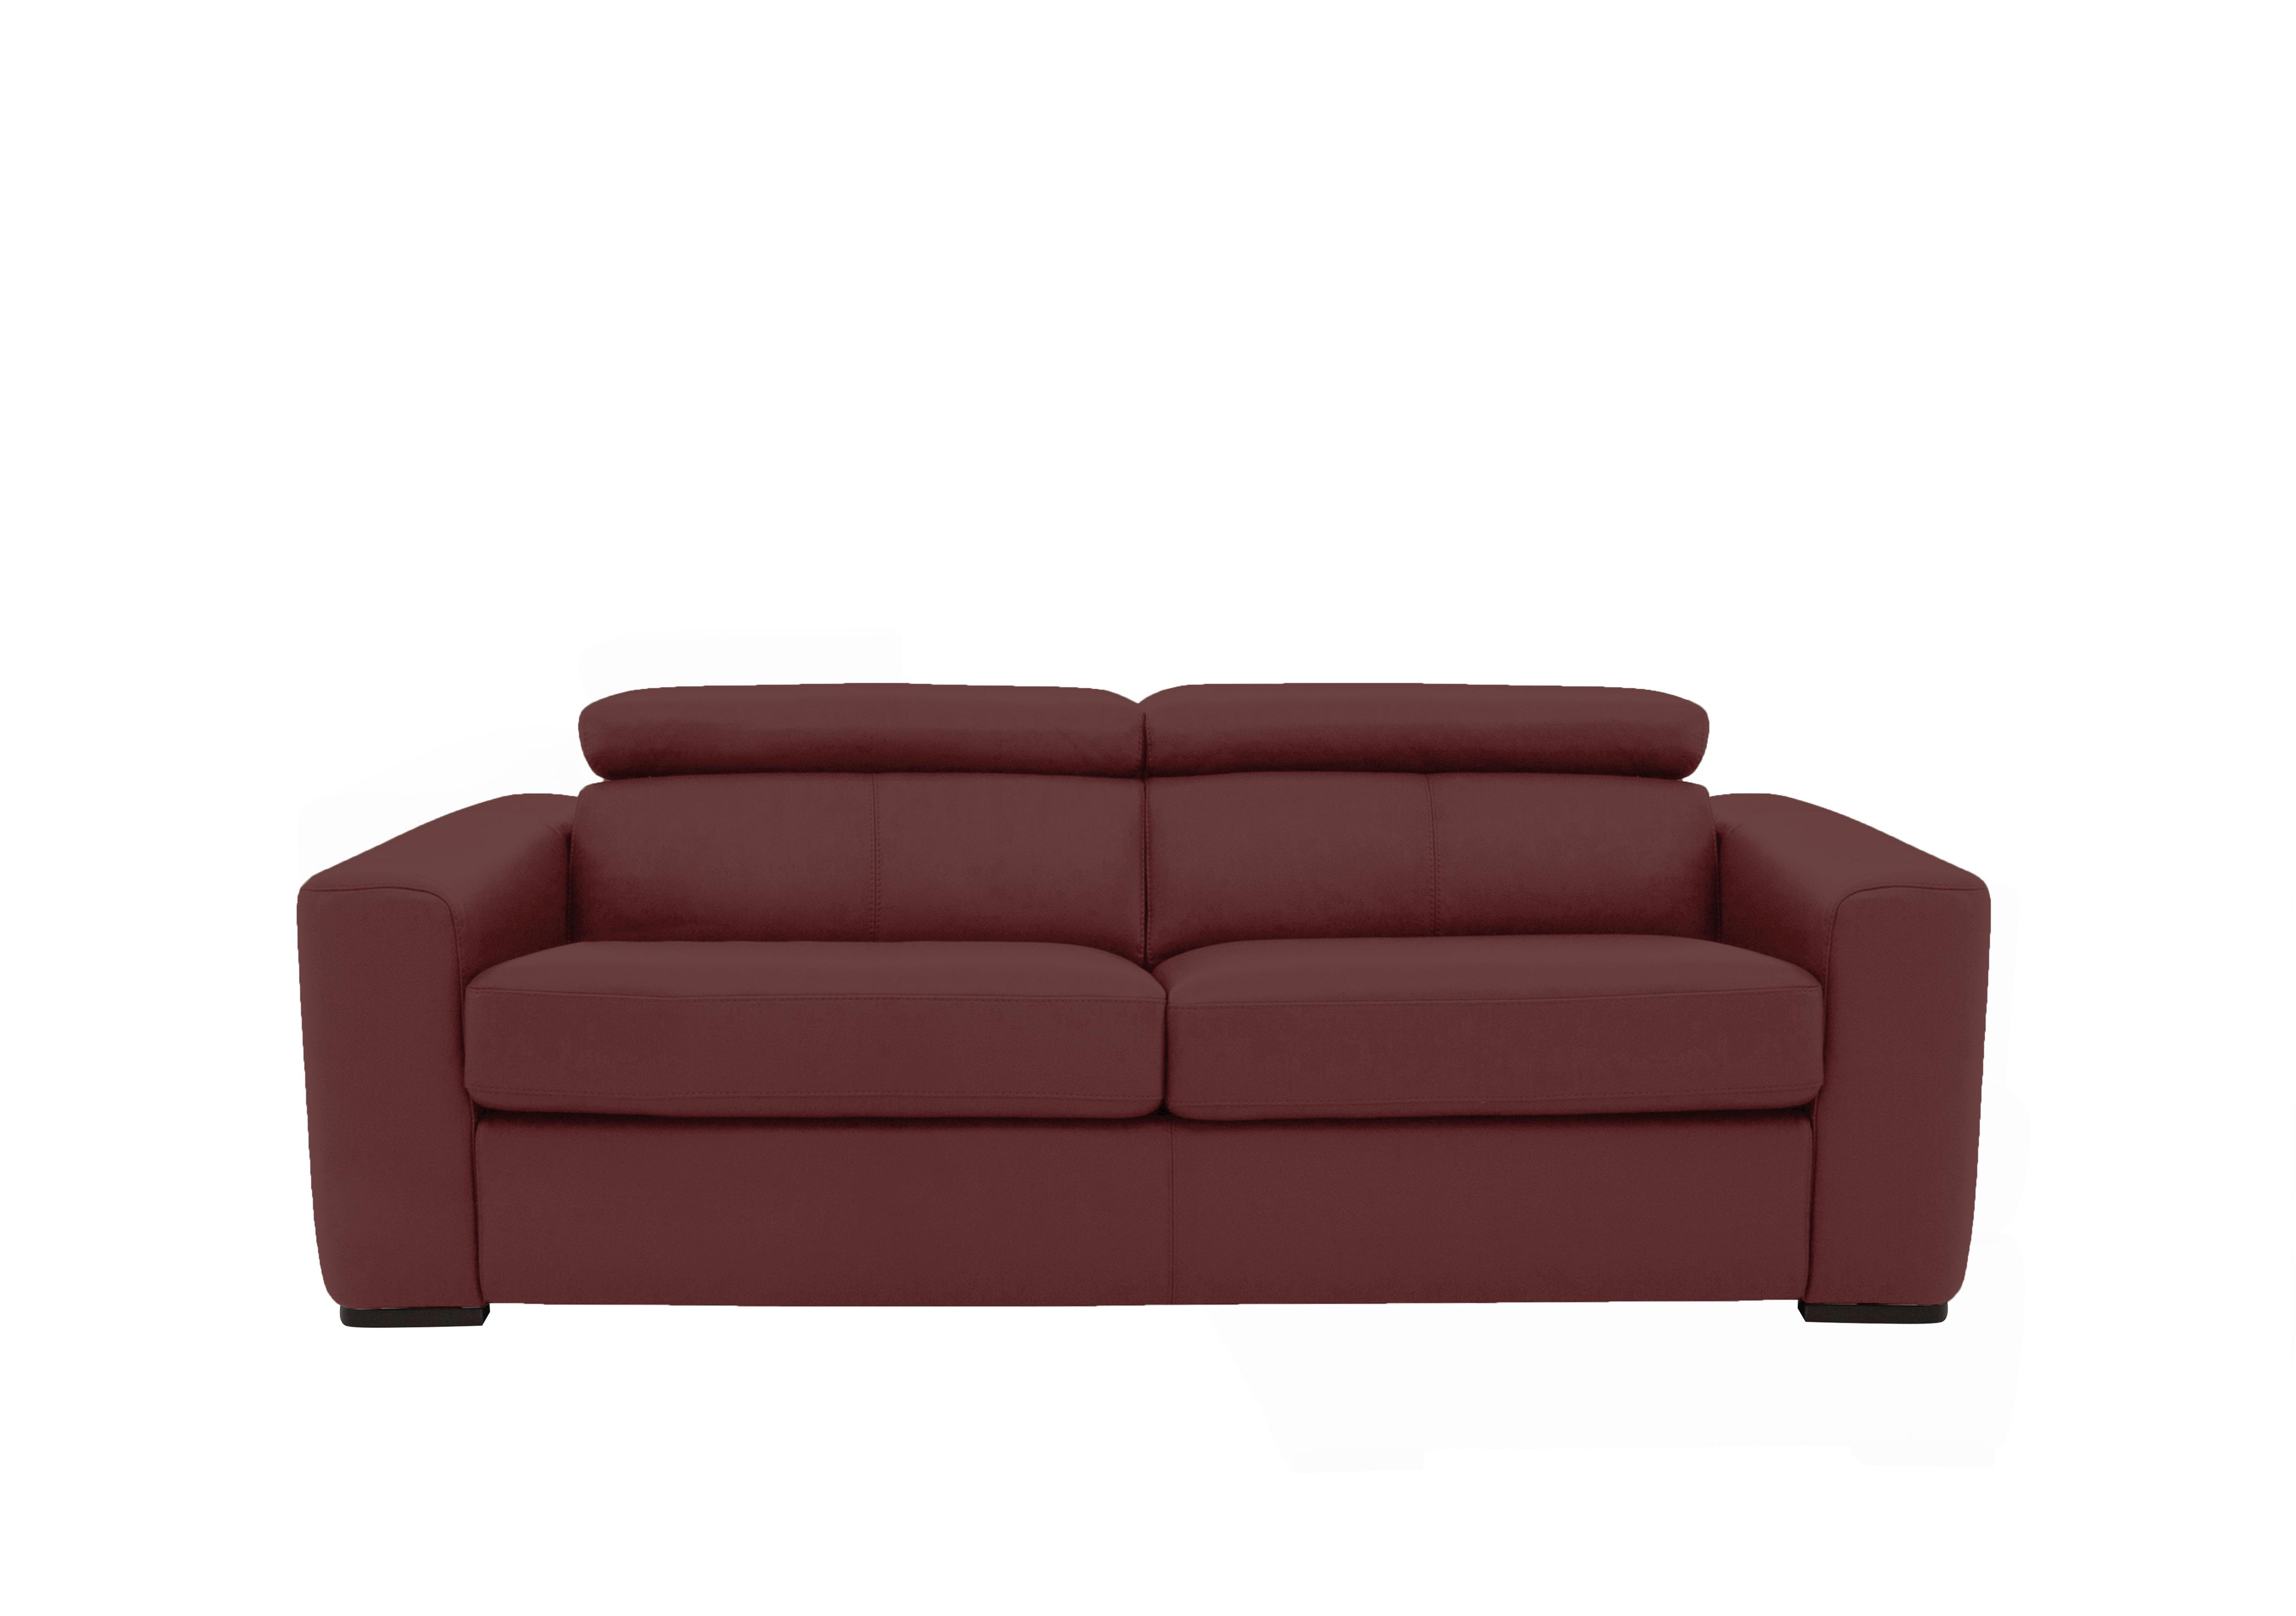 Infinity 3 Seater Leather Sofa Bed in Bv-035c Deep Red on Furniture Village